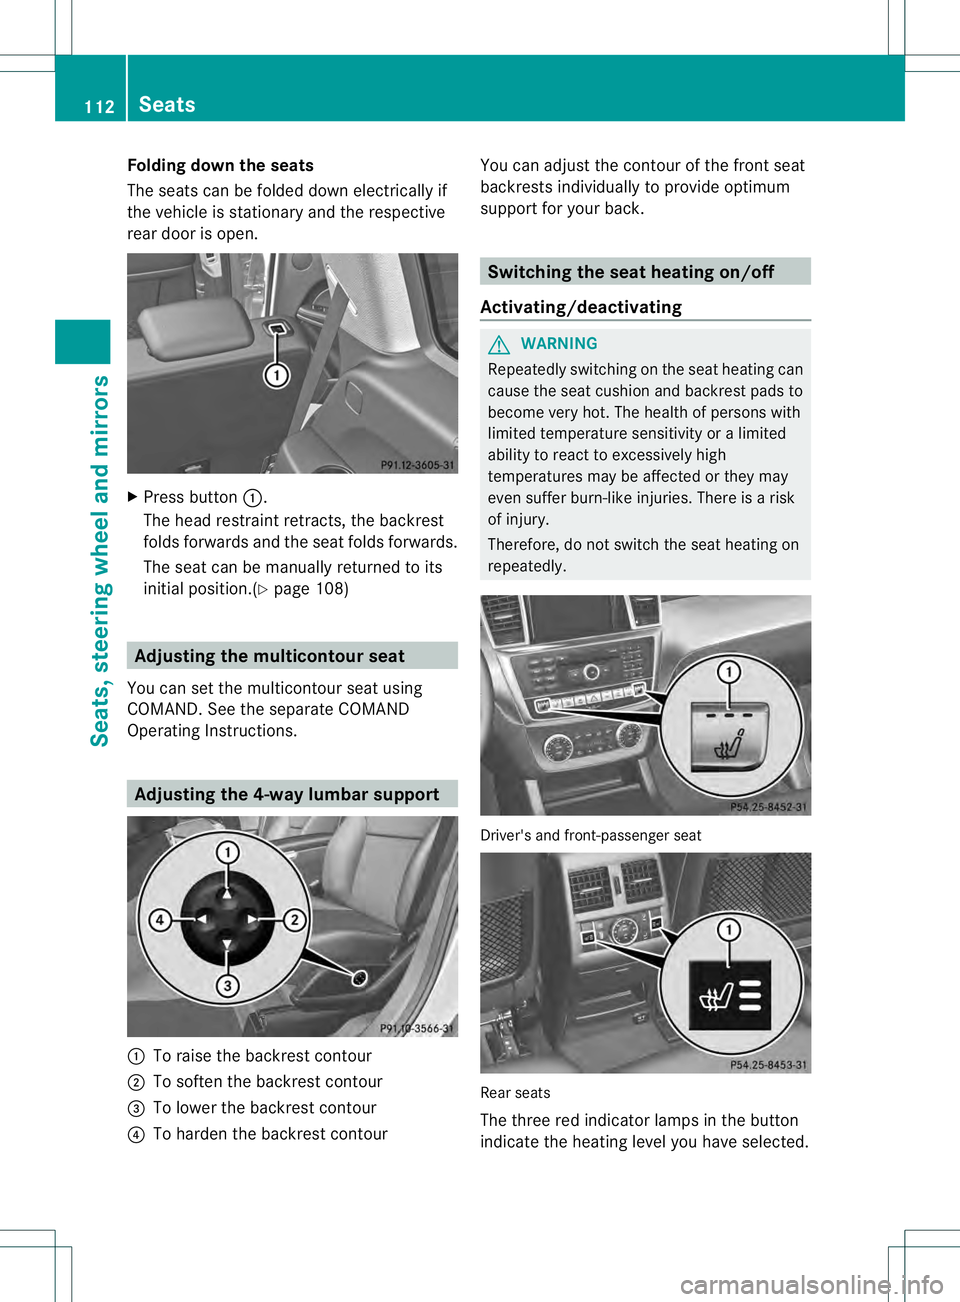 MERCEDES-BENZ GL 2013  Owners Manual Folding down the seats
The seats can be folded down electrically if
the vehicle is stationary and the respective
rear door is open.
X
Press button 0002.
The head restraint retracts, the backrest
folds